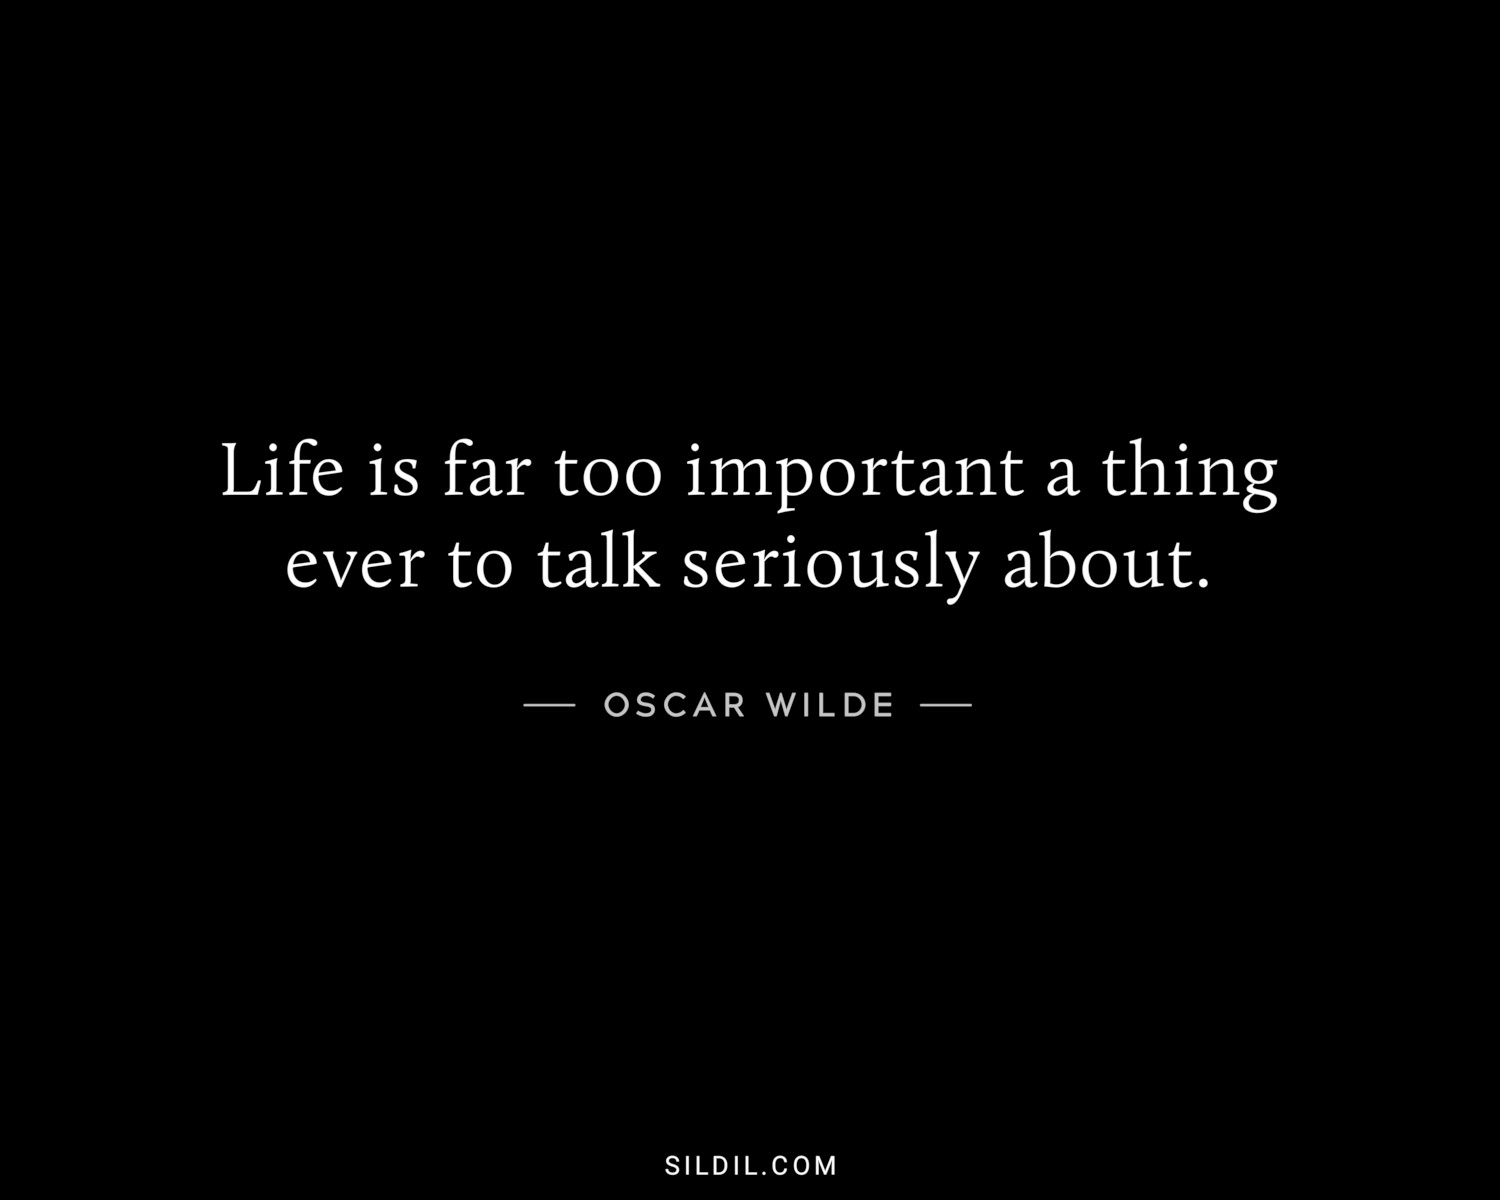 Life is far too important a thing ever to talk seriously about.